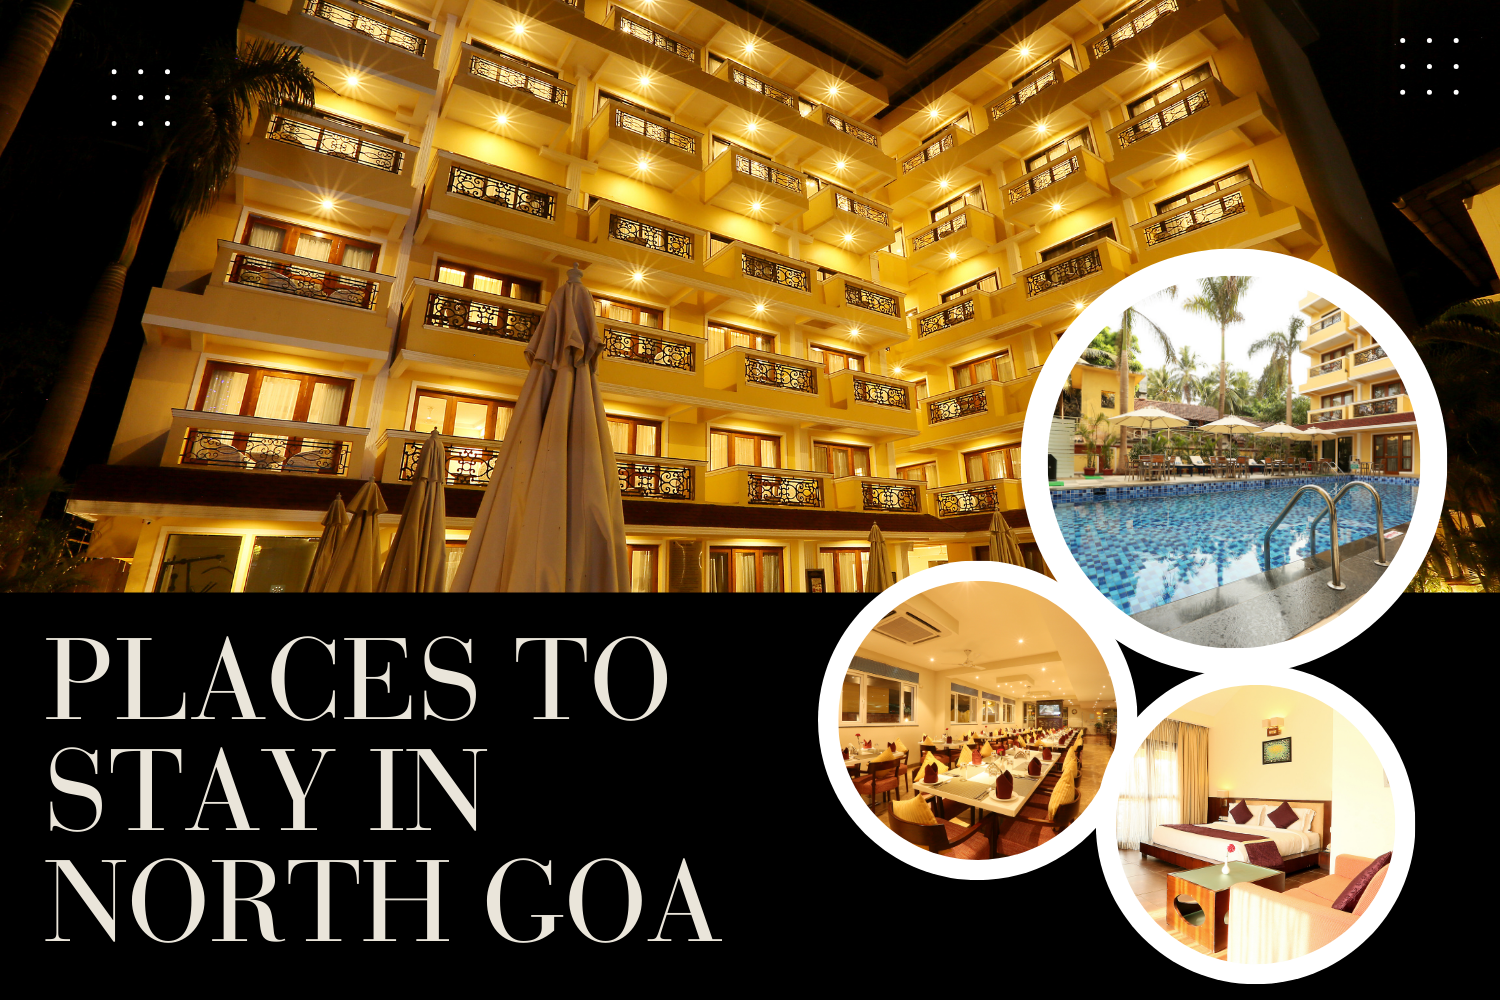 Discovering ideal vacation fun choices with places to stay in north goa